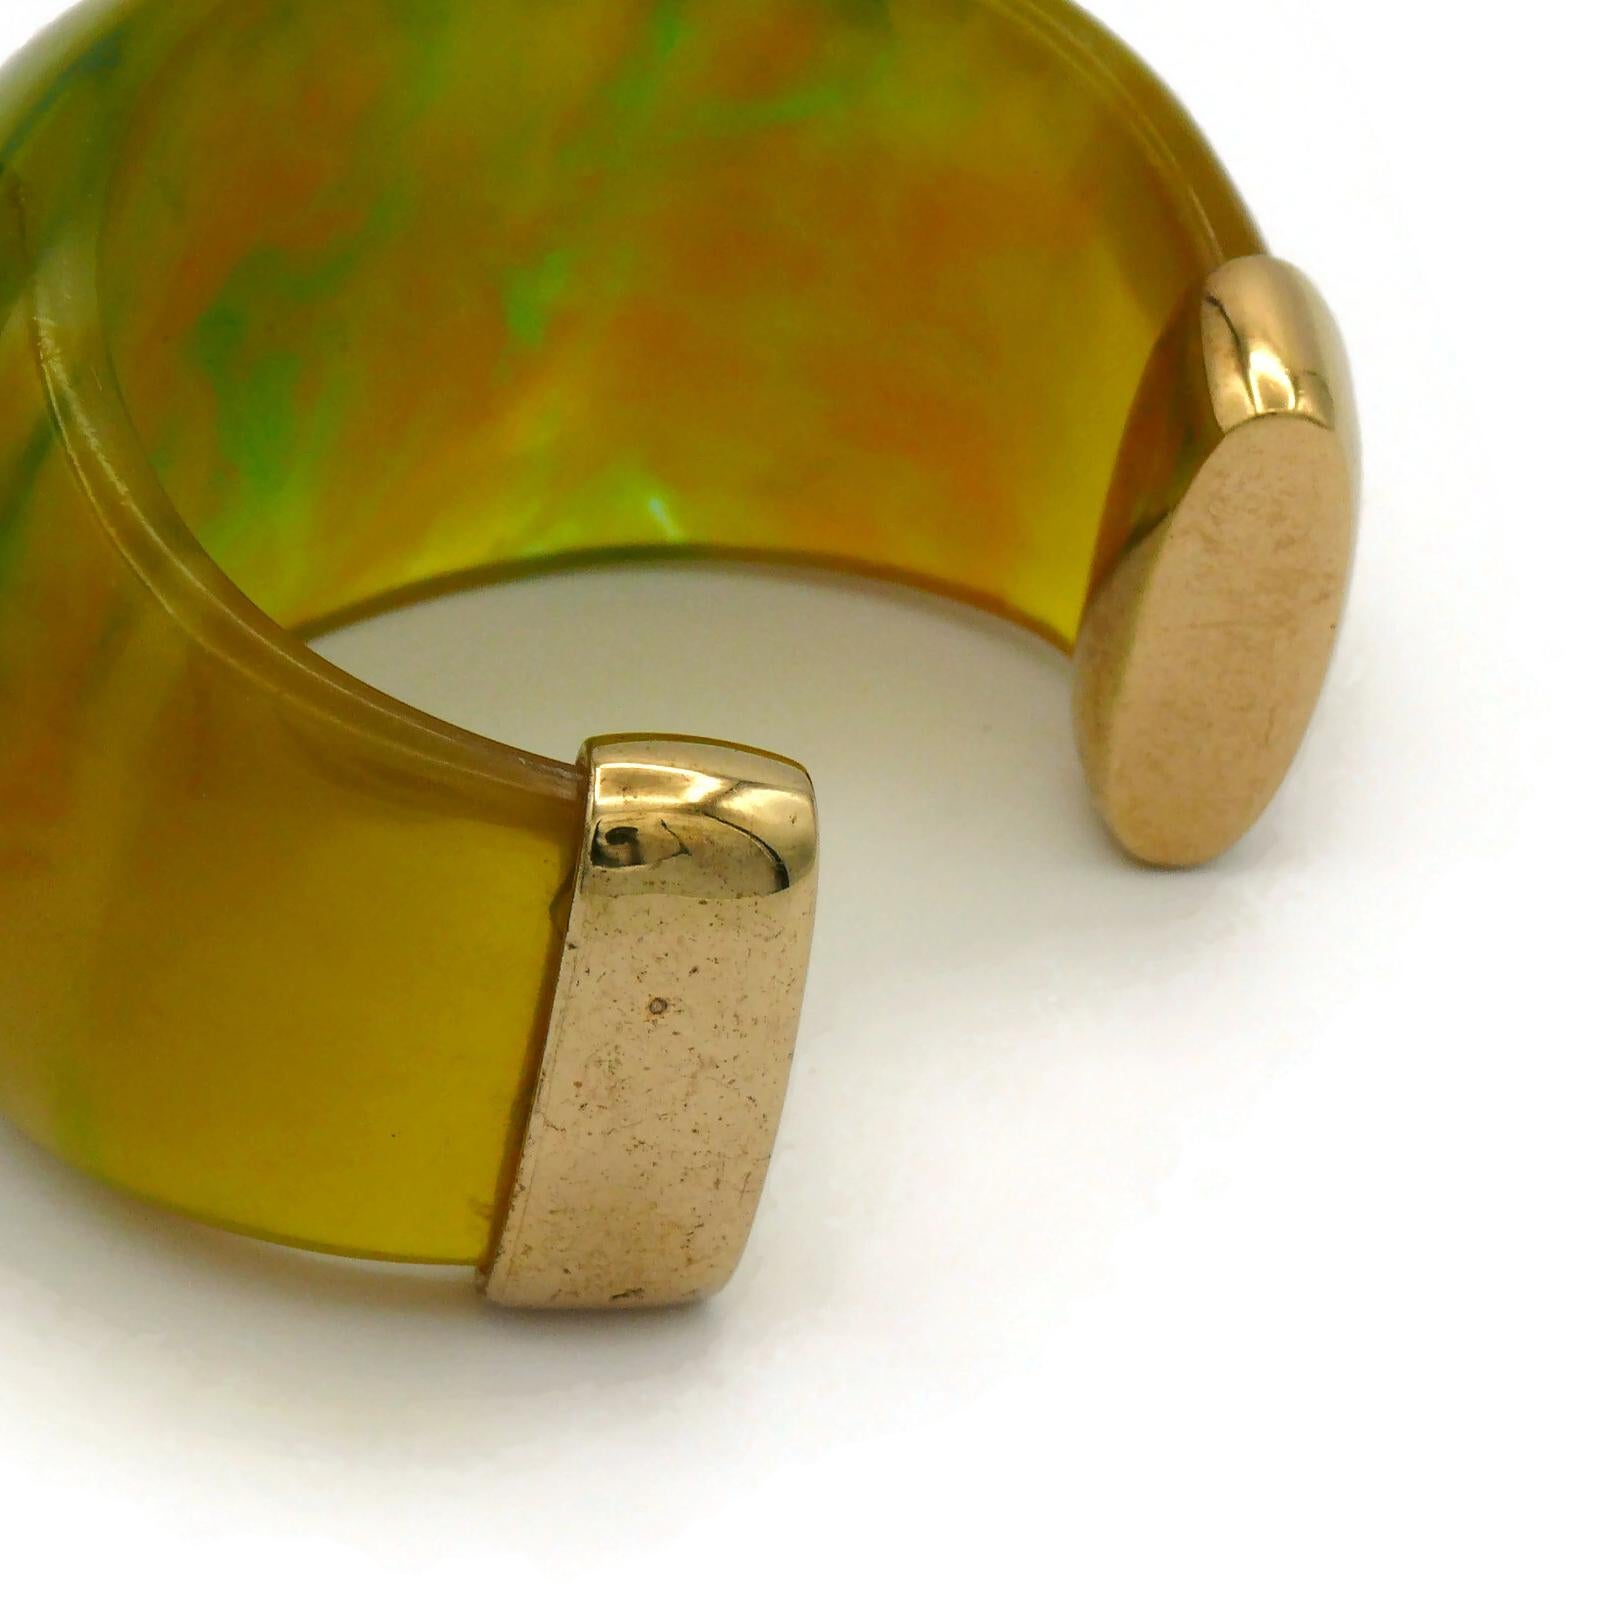 YVES SAINT LAURENT YSL Vintage Yellow Green Marbled Resin Cuff Bracelet For Sale 10